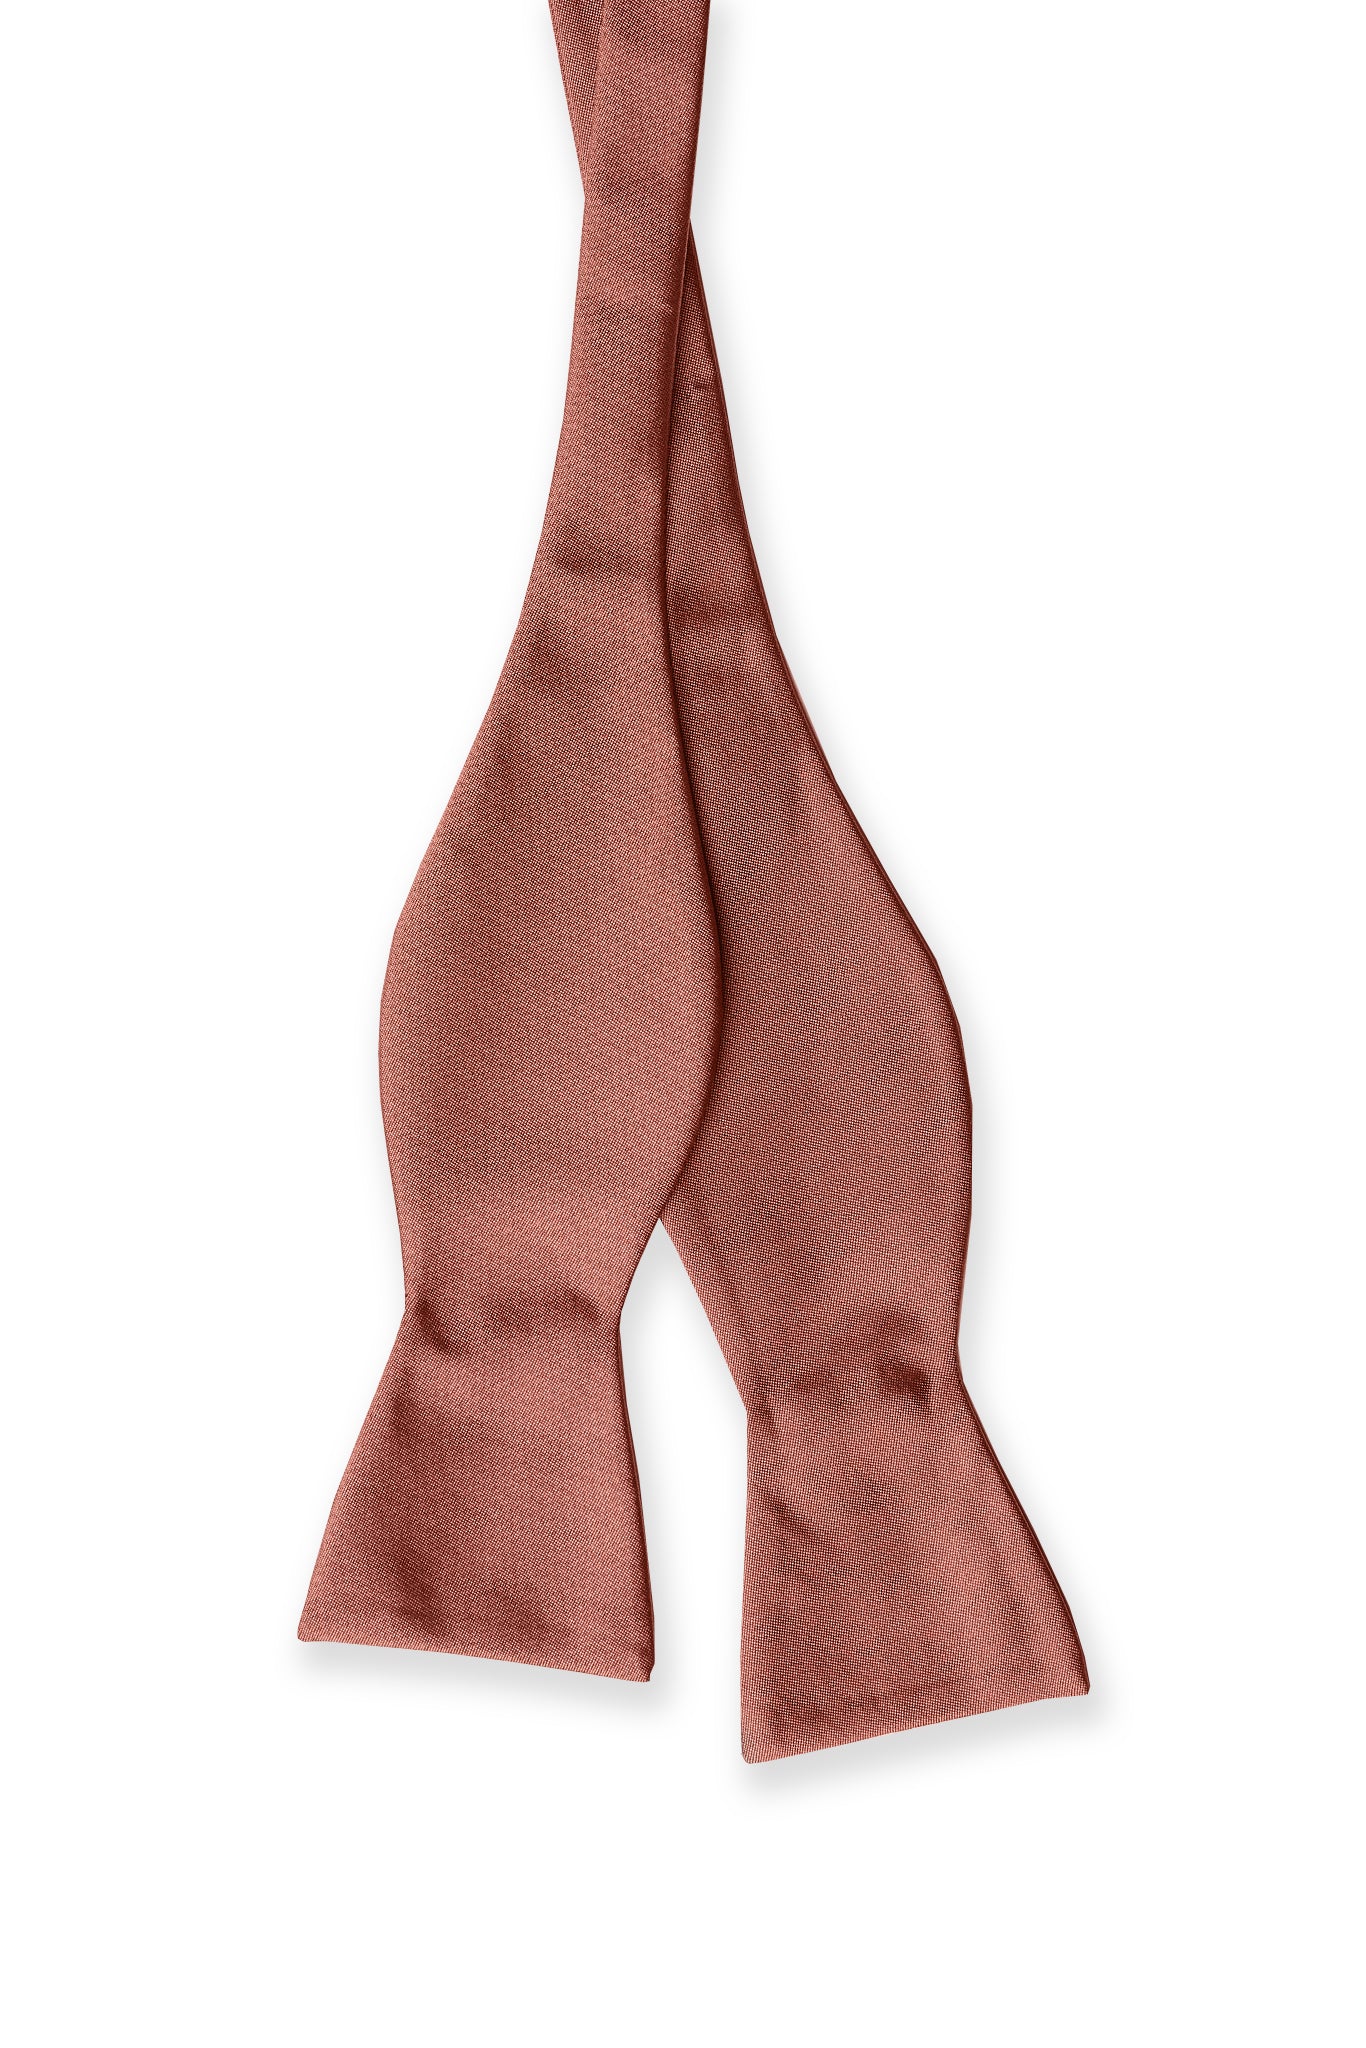 Daniel Bow Tie in desert rose by Birdy Grey, front view